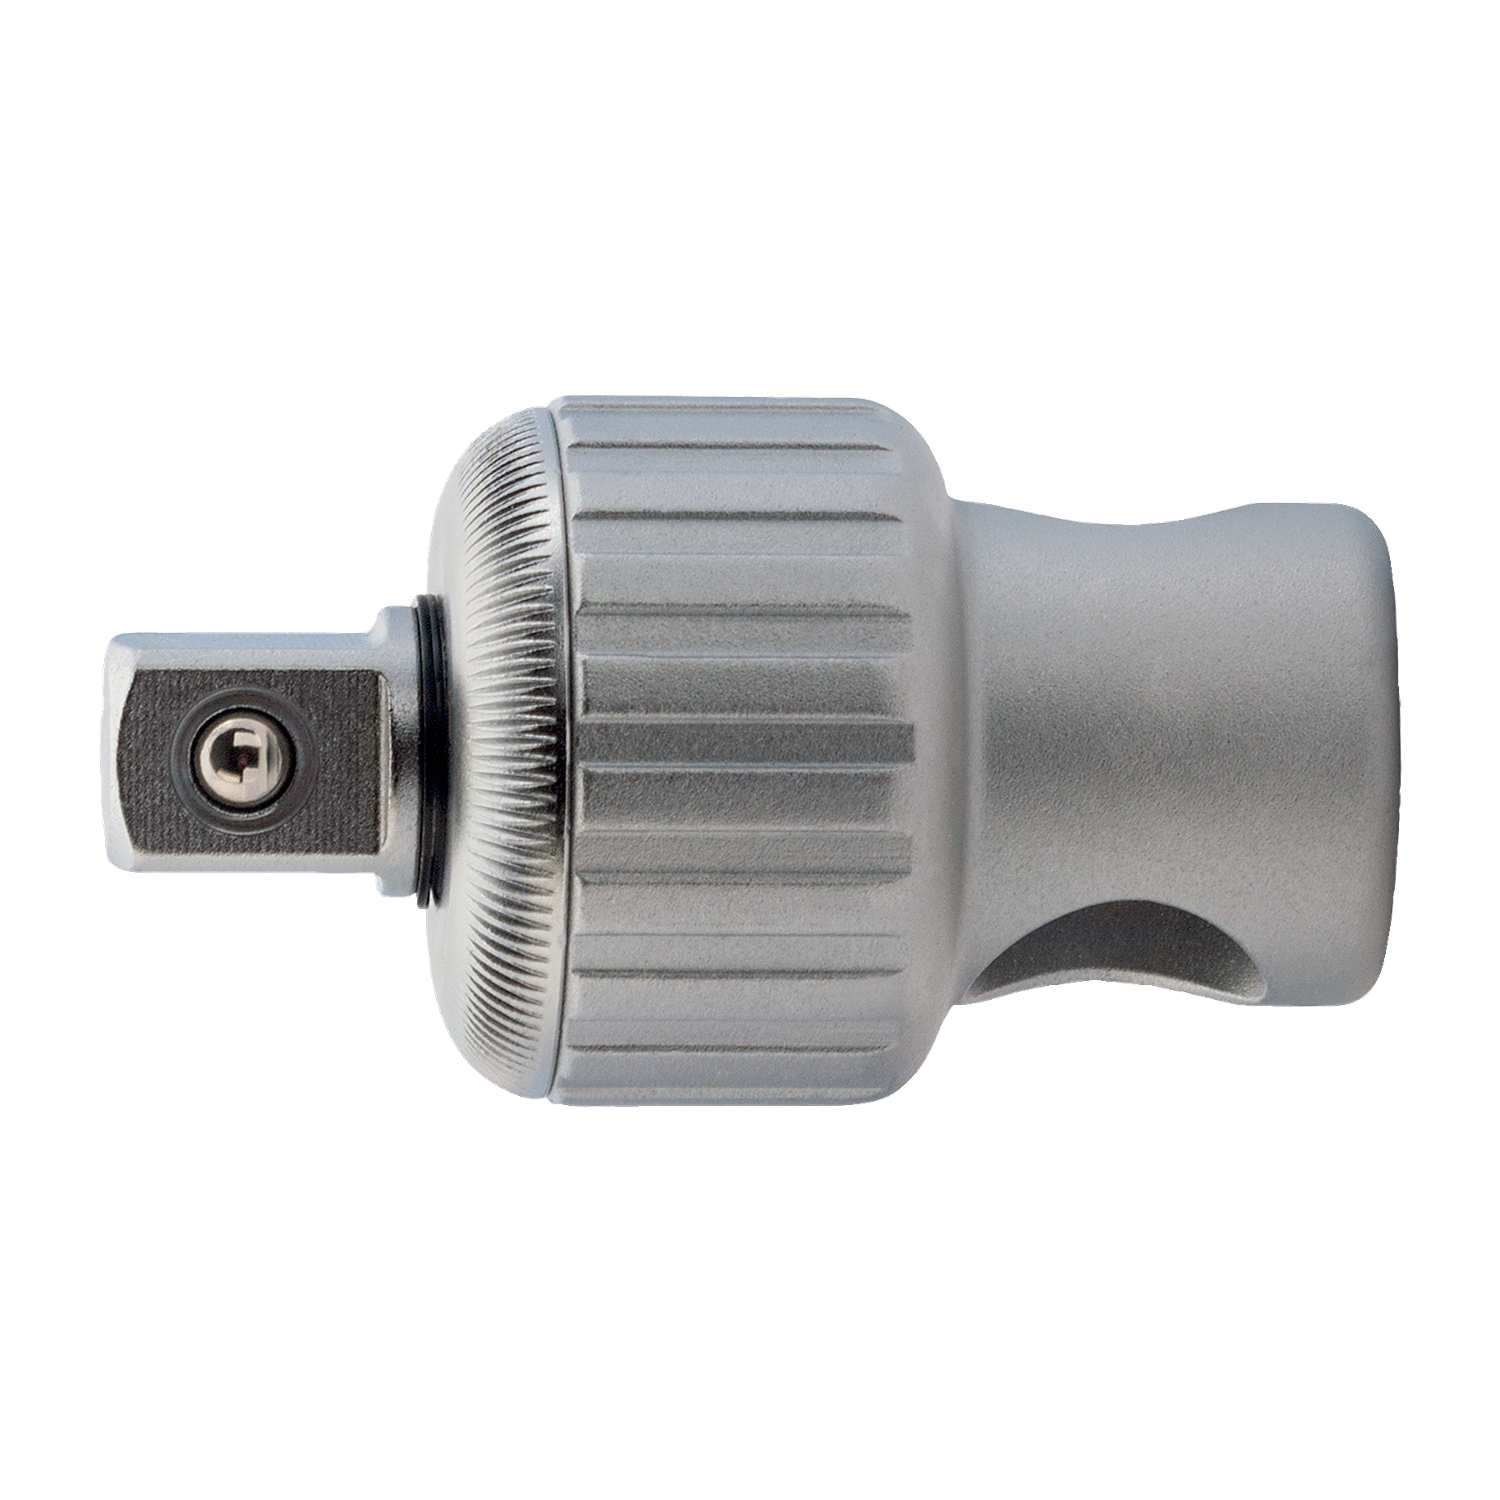 BAHCO 8151-1/2 Ratcheting Adaptor With 52 Teeth For 1/2" Ratchet - Premium Ratcheting Adaptor from BAHCO - Shop now at Yew Aik.